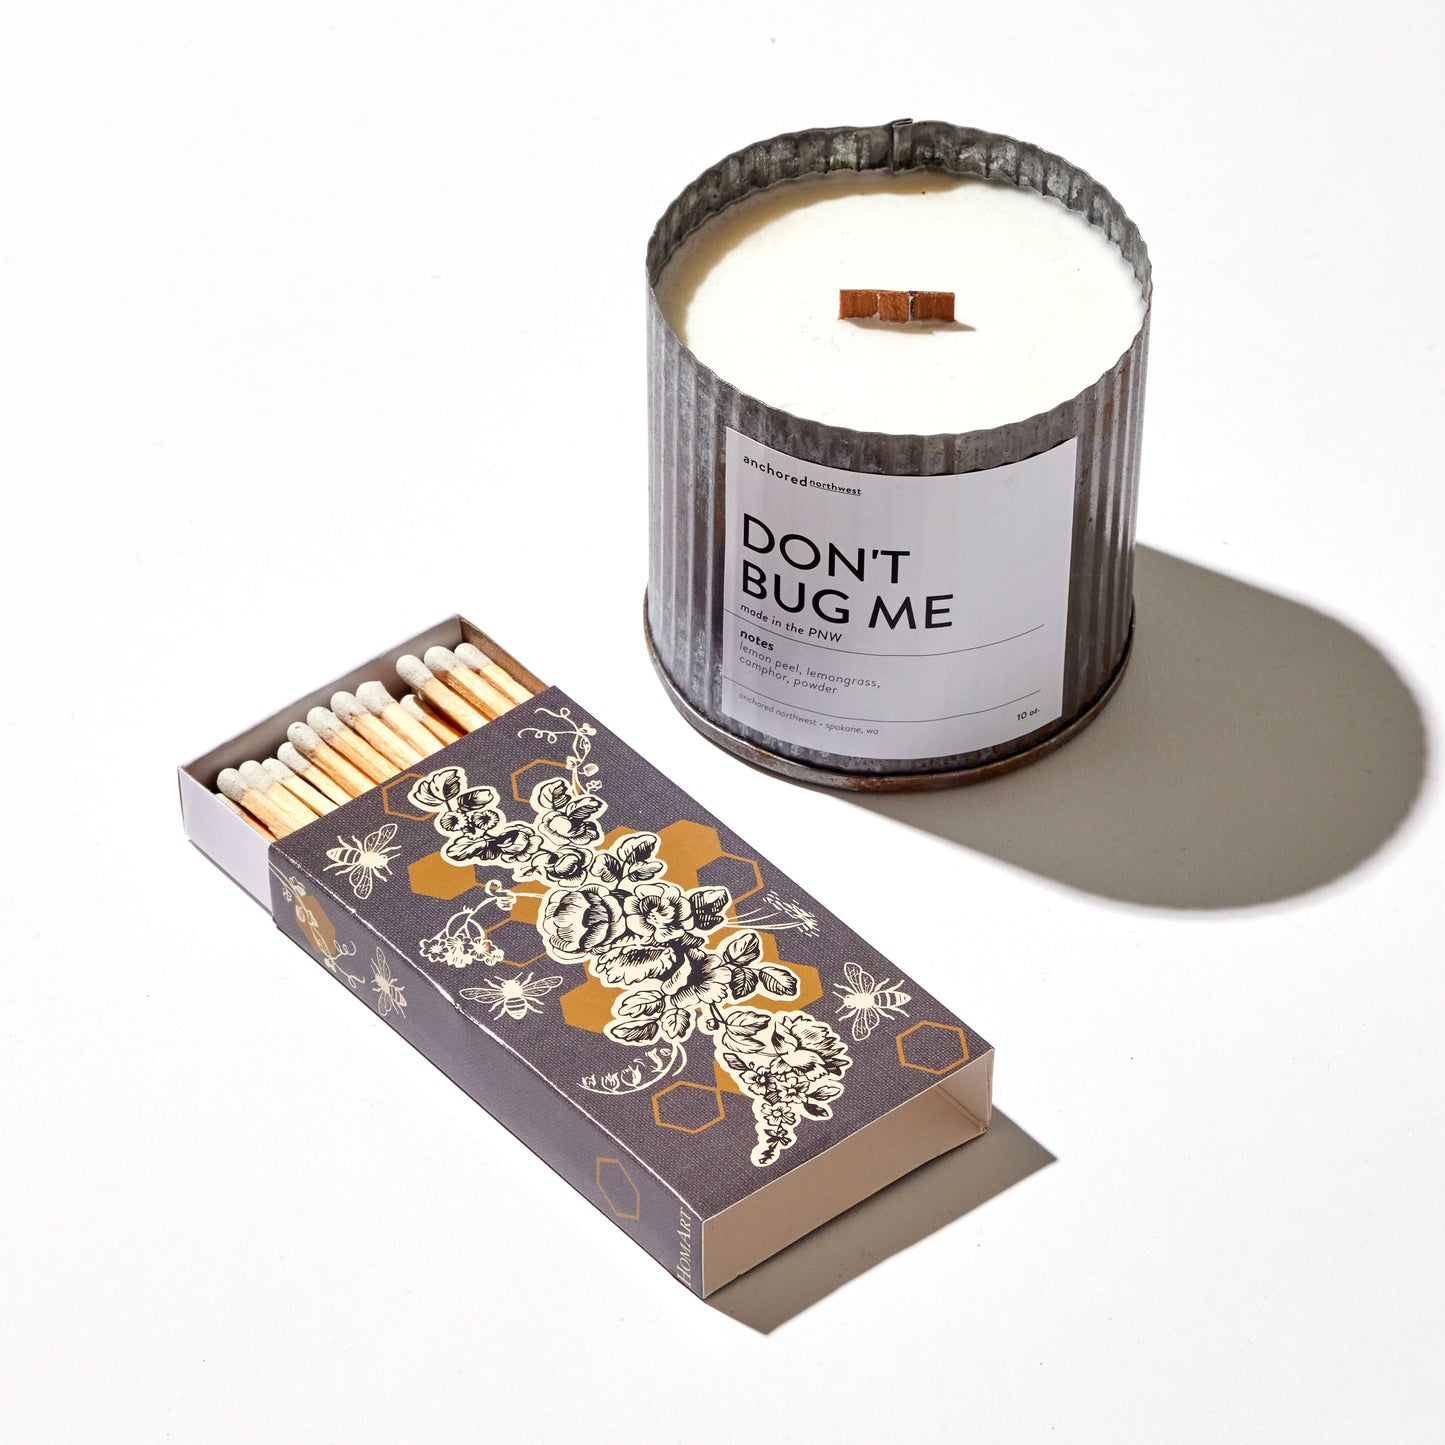 Candle + Matches Set - Unique Gardening Gift